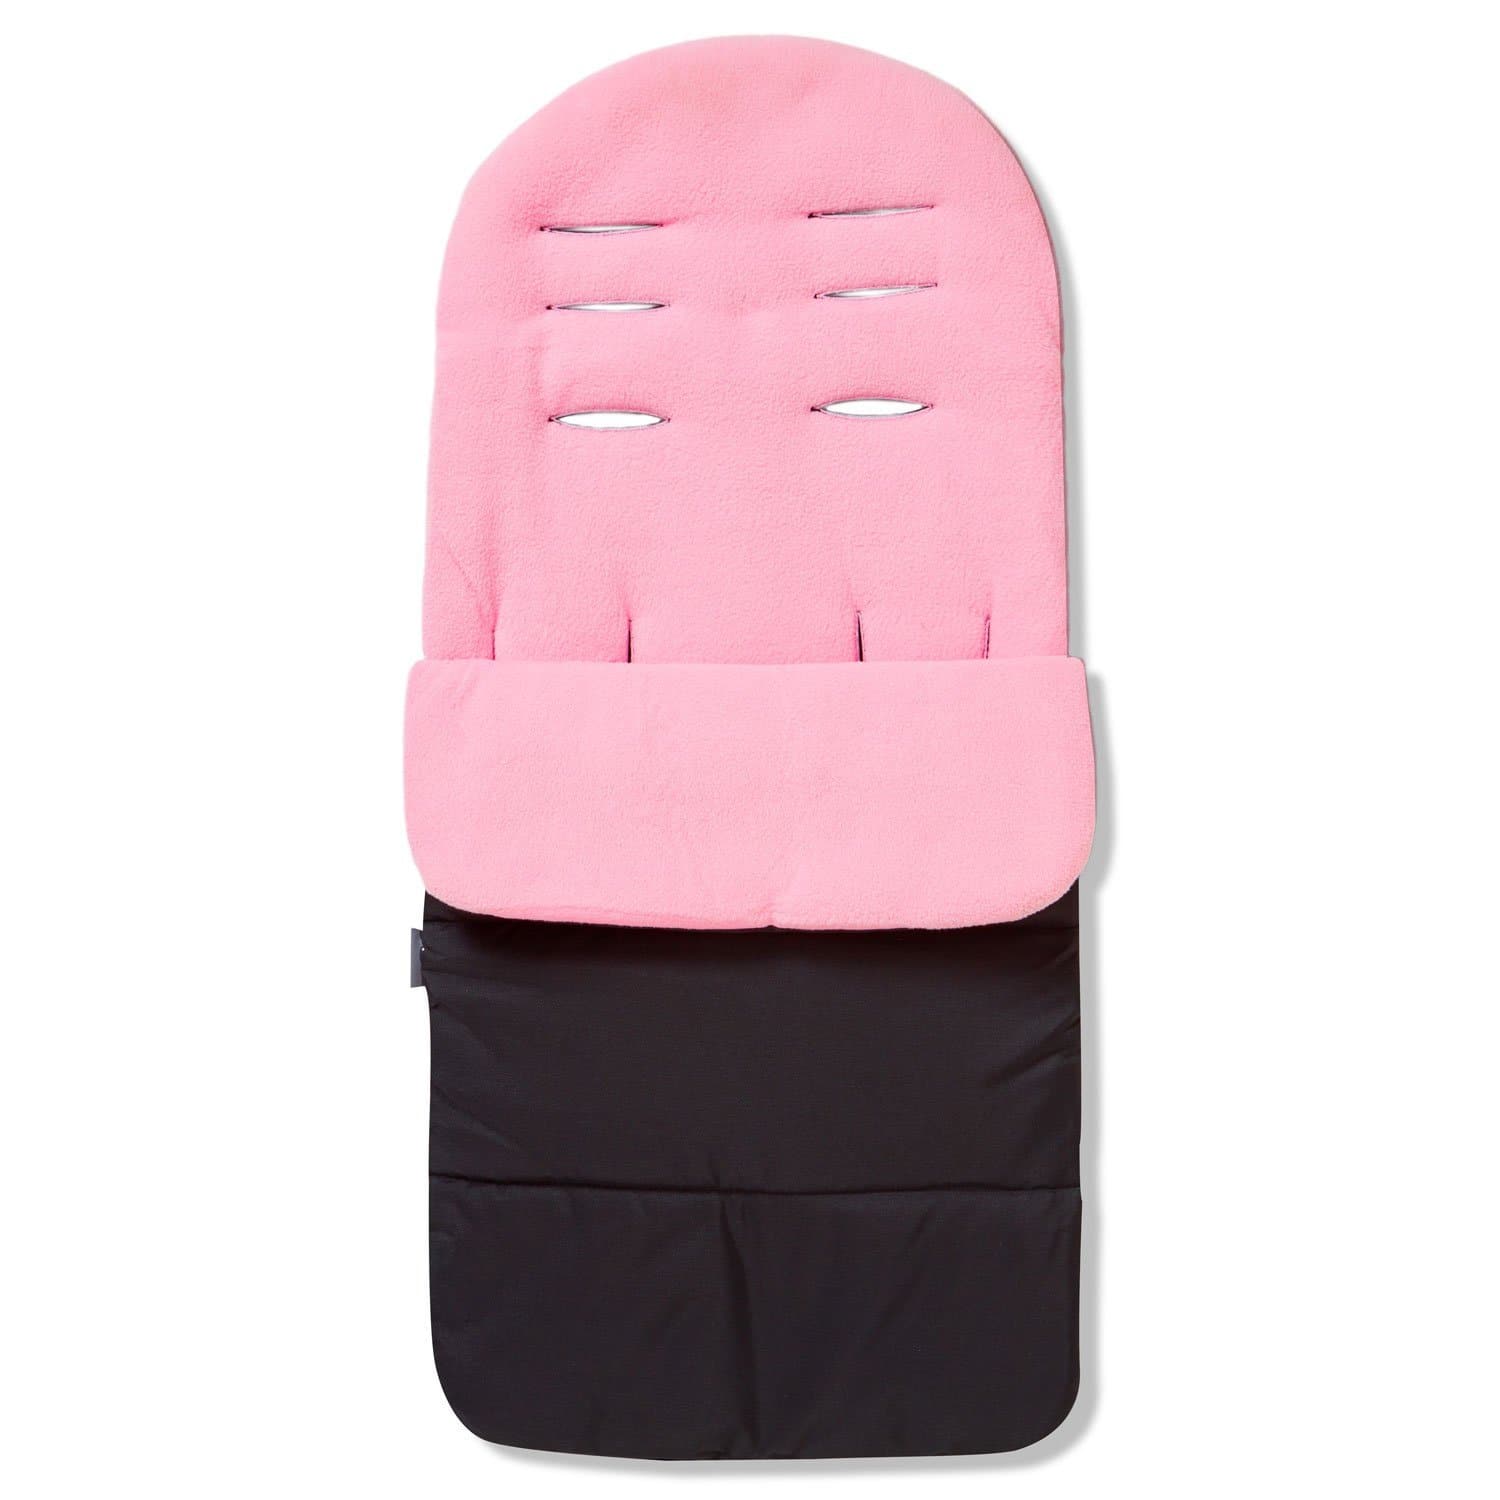 Premium Footmuff / Cosy Toes Compatible with Little Shield - Candy Pink / Fits All Models | For Your Little One